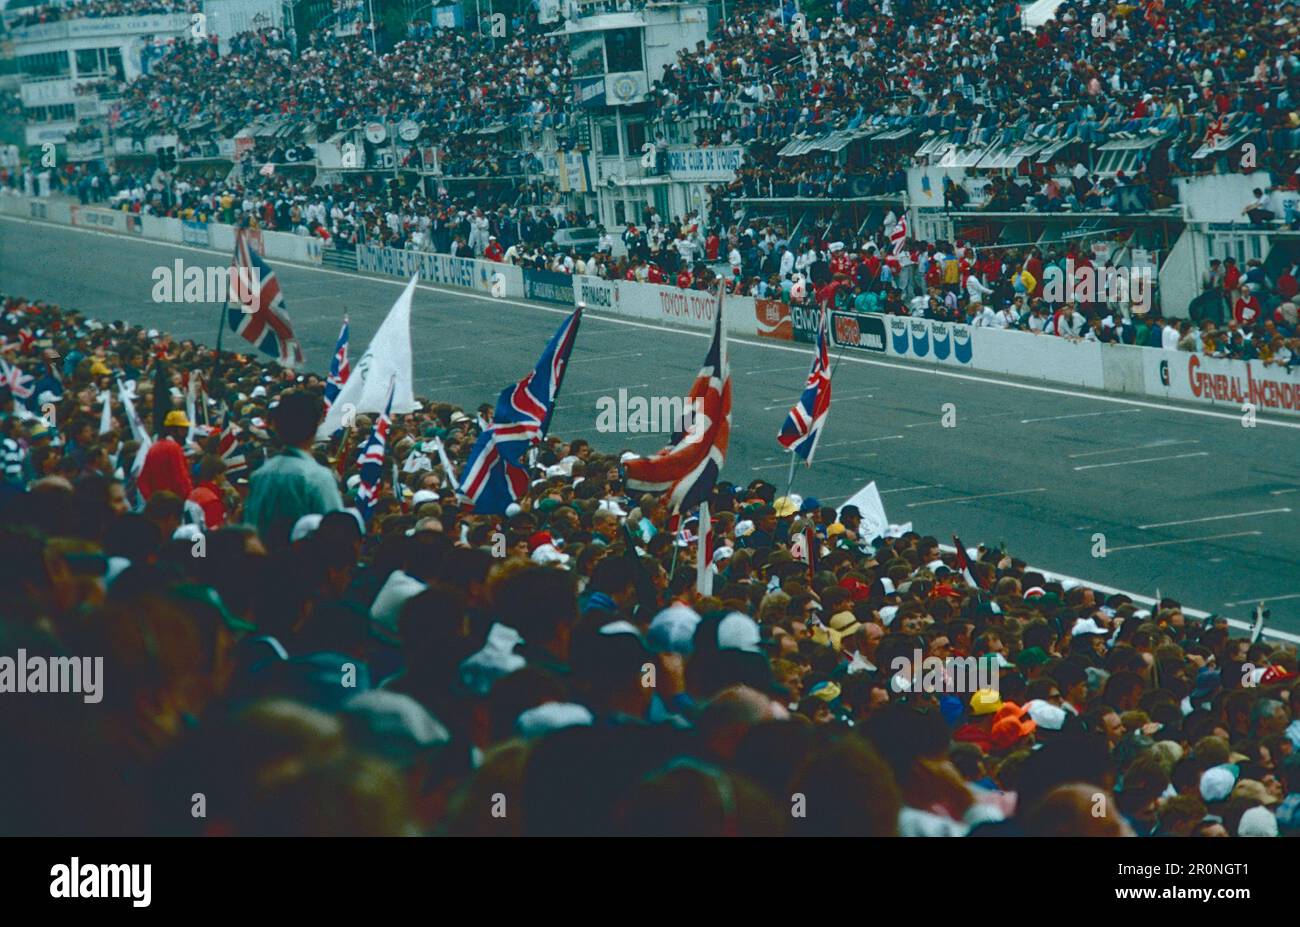 British supporters at the car racing championship, 1990s Stock Photo